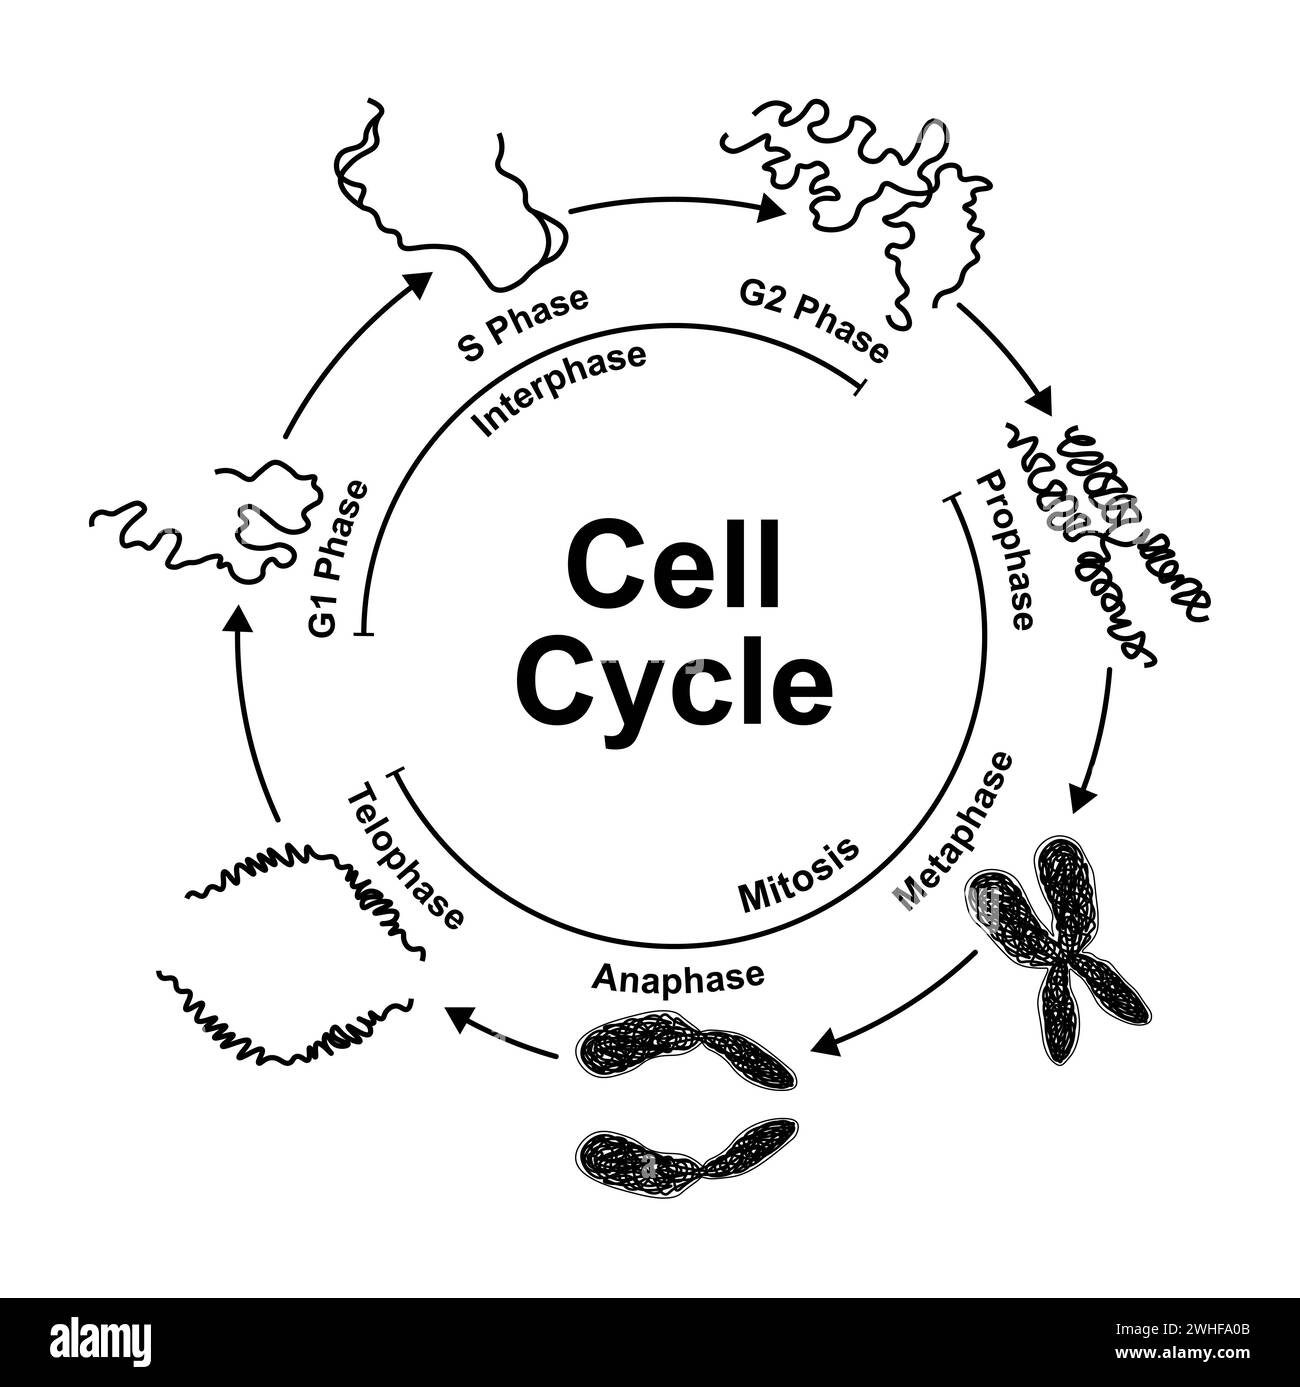 Cell cycle, illustration Stock Photo